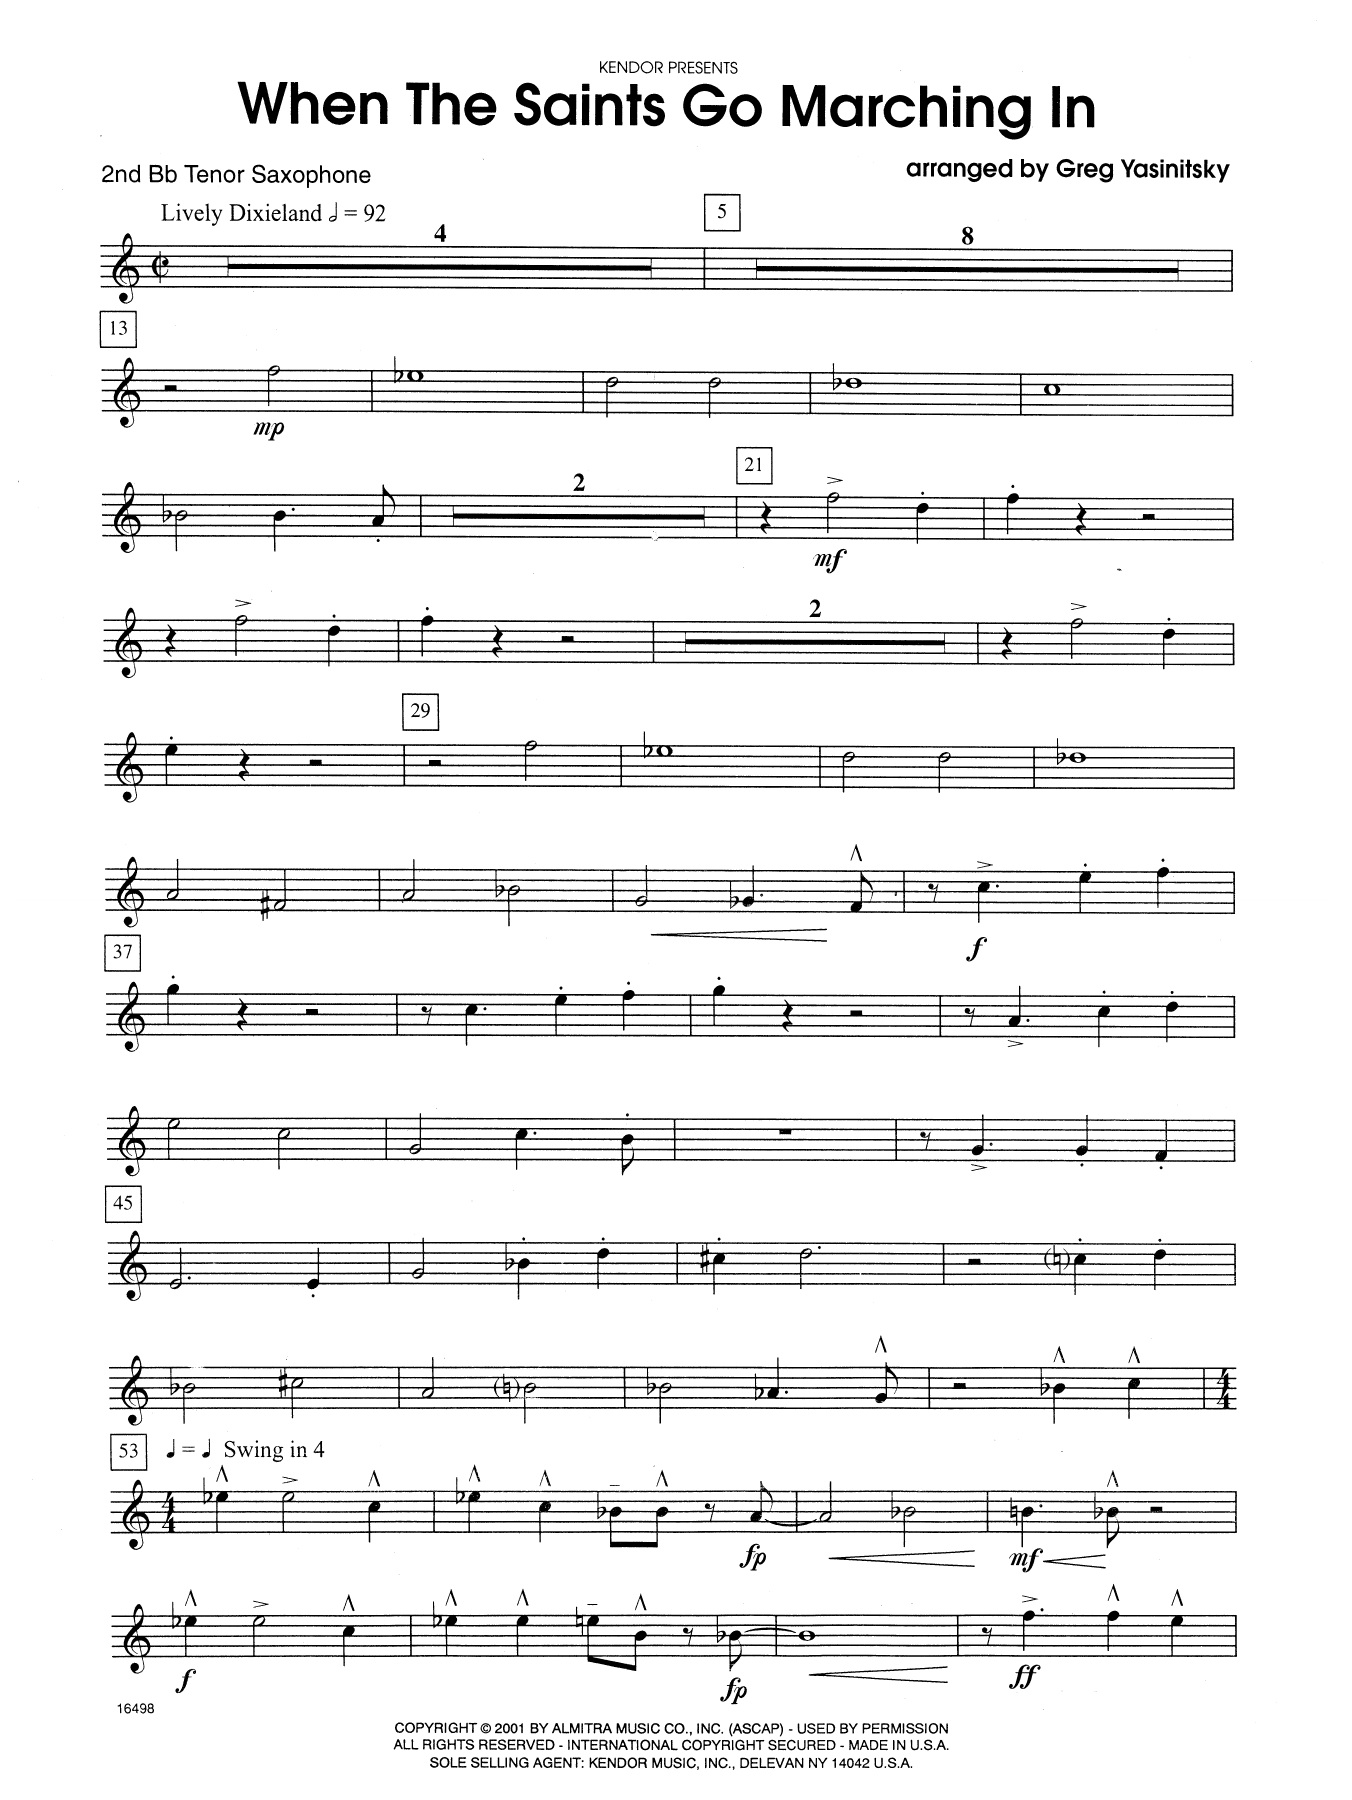 Gregory Yasinitsky When the Saints Go Marching In - 2nd Bb Tenor Saxophone sheet music notes and chords. Download Printable PDF.